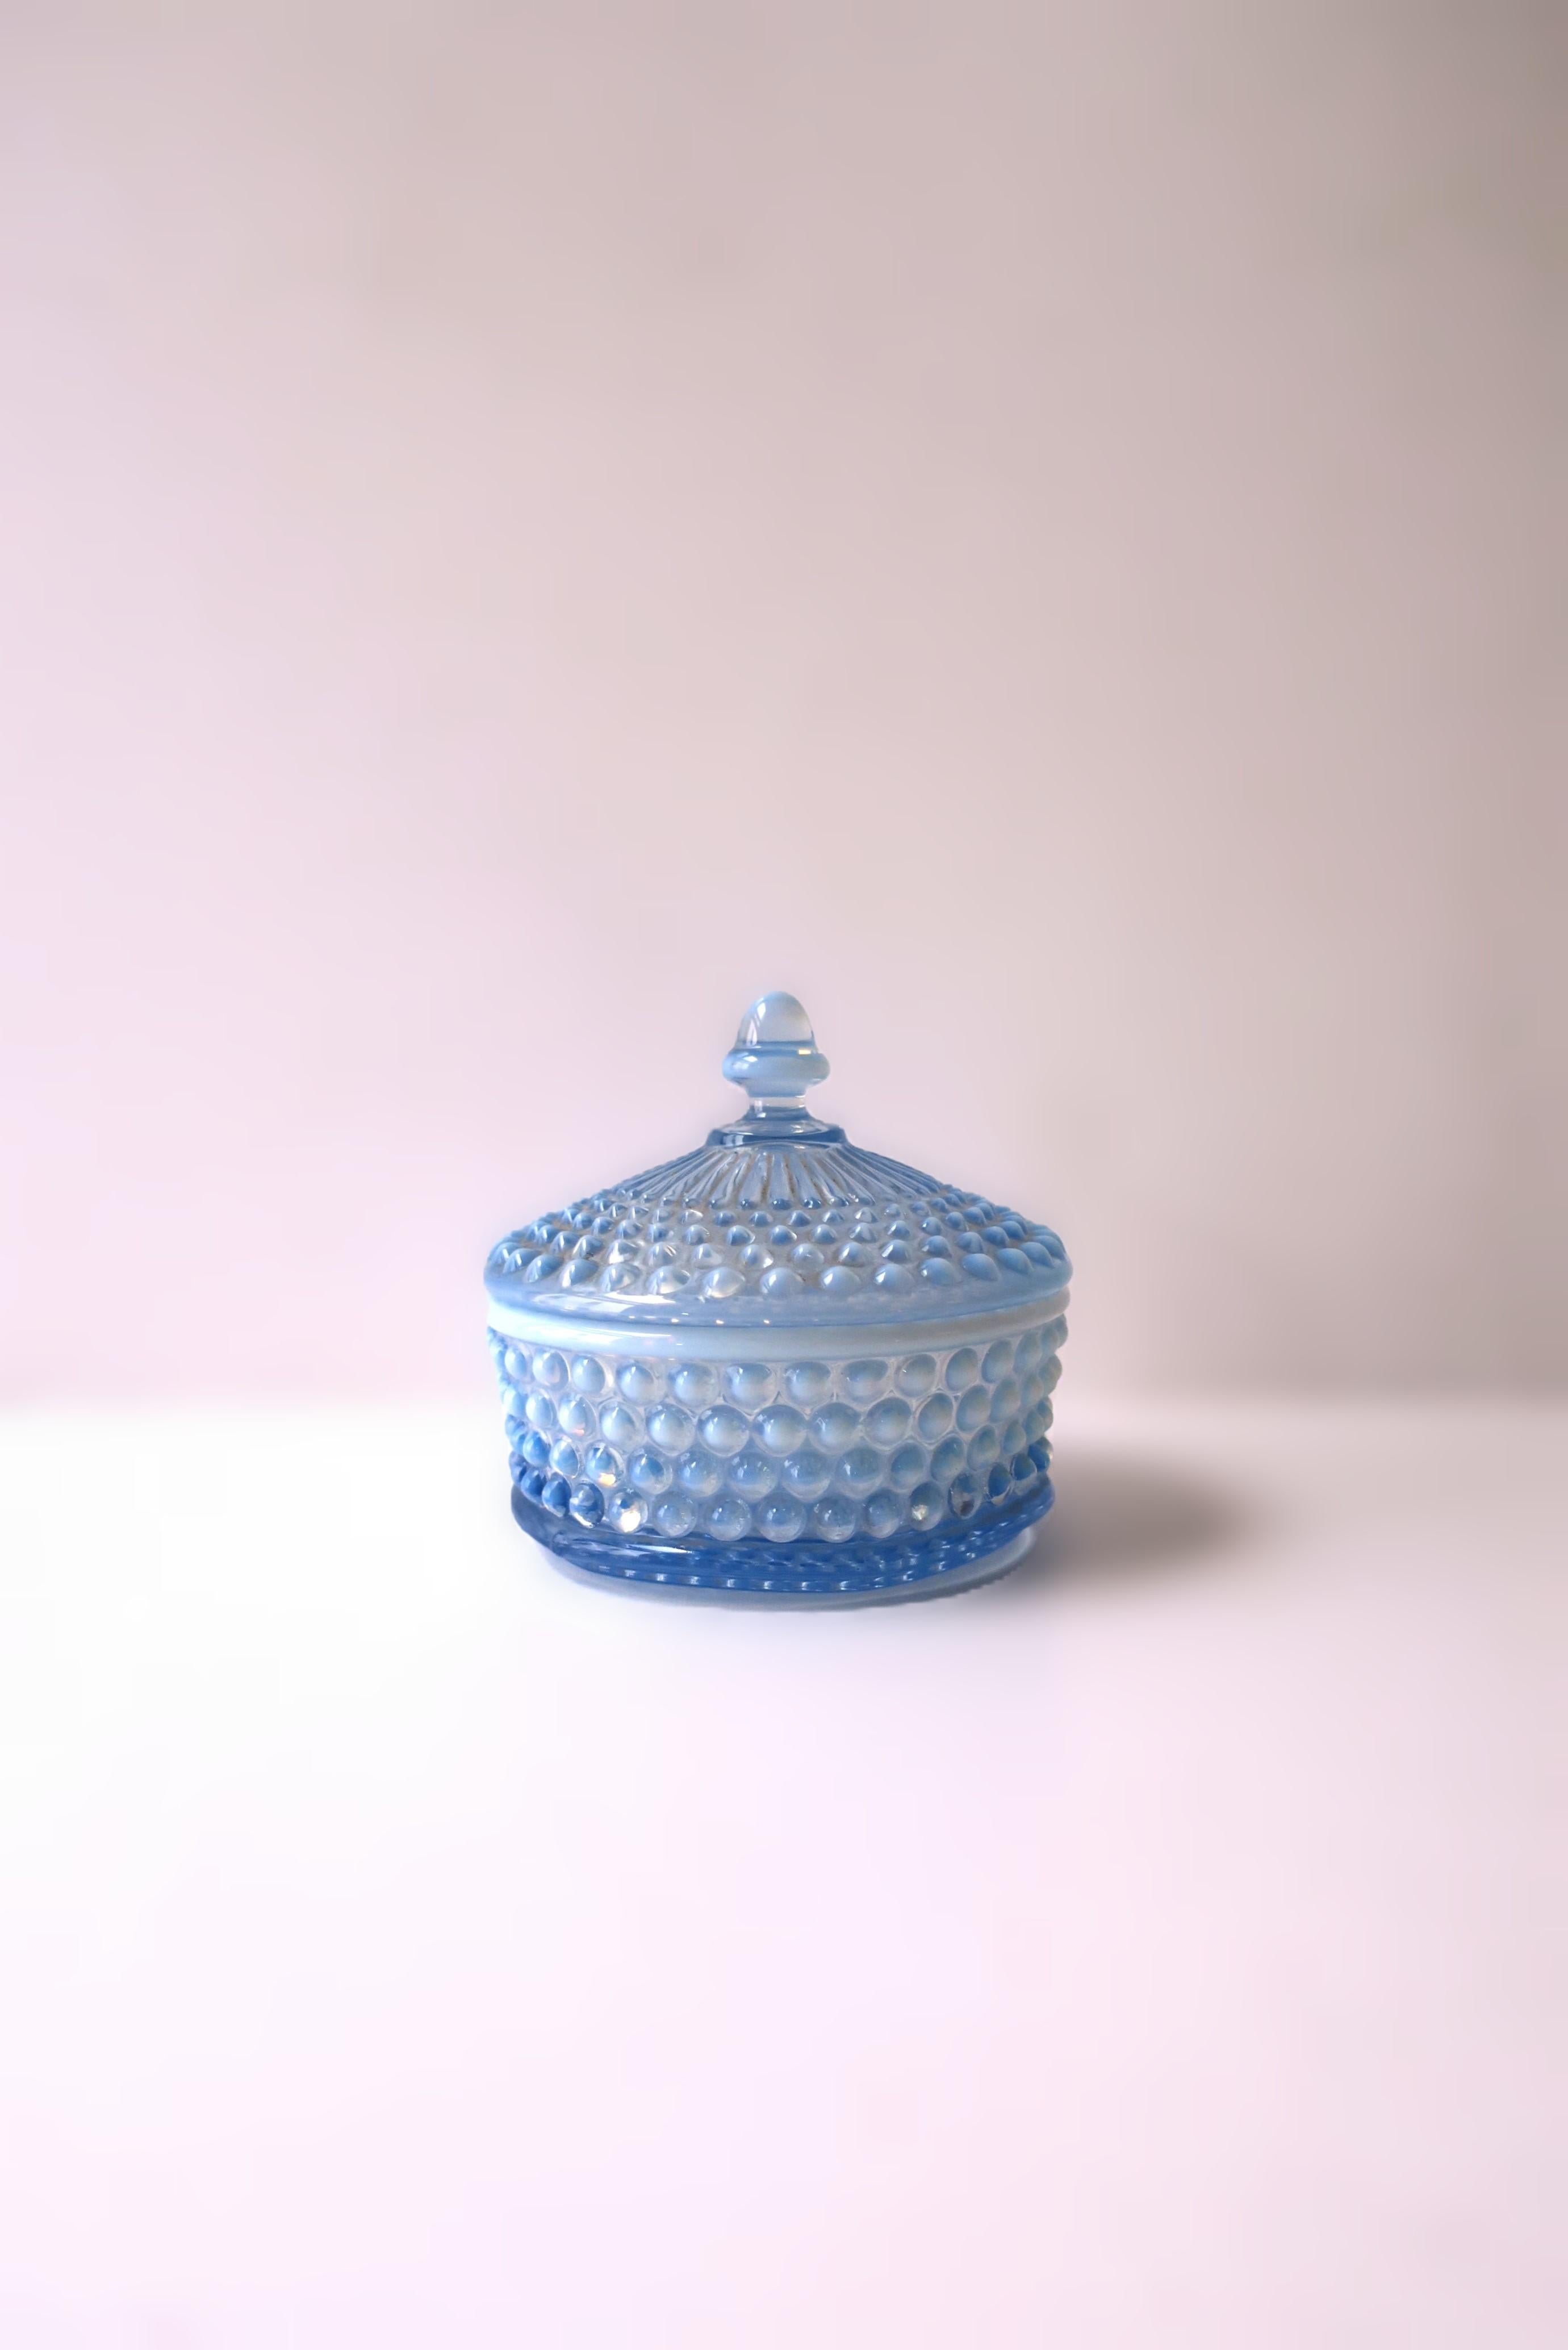 A beautiful blue opaline ombre hobnail art glass vanity box, circa 20th century. Box with hobnail design, blue opaline and ombre hue, finished with a knob lid; a great piece for a vanity, dresser, walk-in-closet, cocktail table, etc., to hold